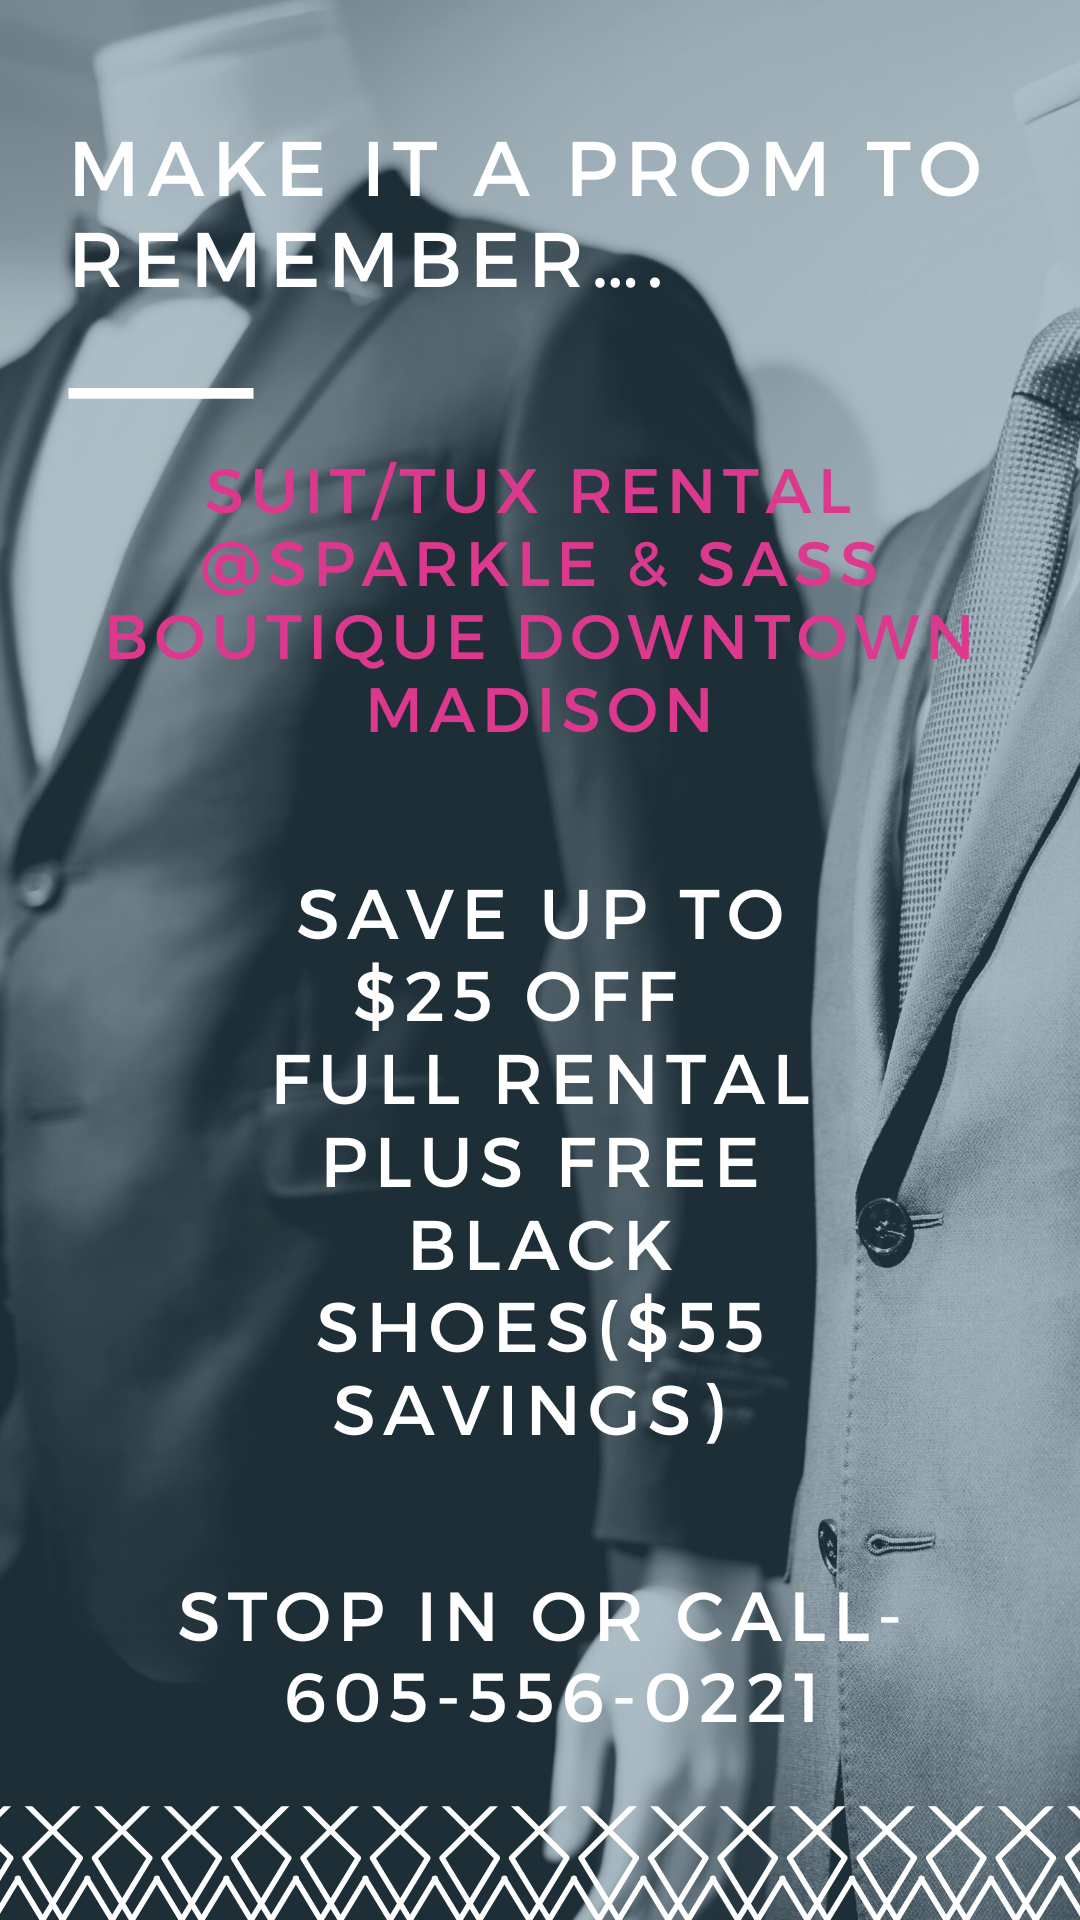 <h1 class="tribe-events-single-event-title">Prom Suit/Tux Rentals</h1>